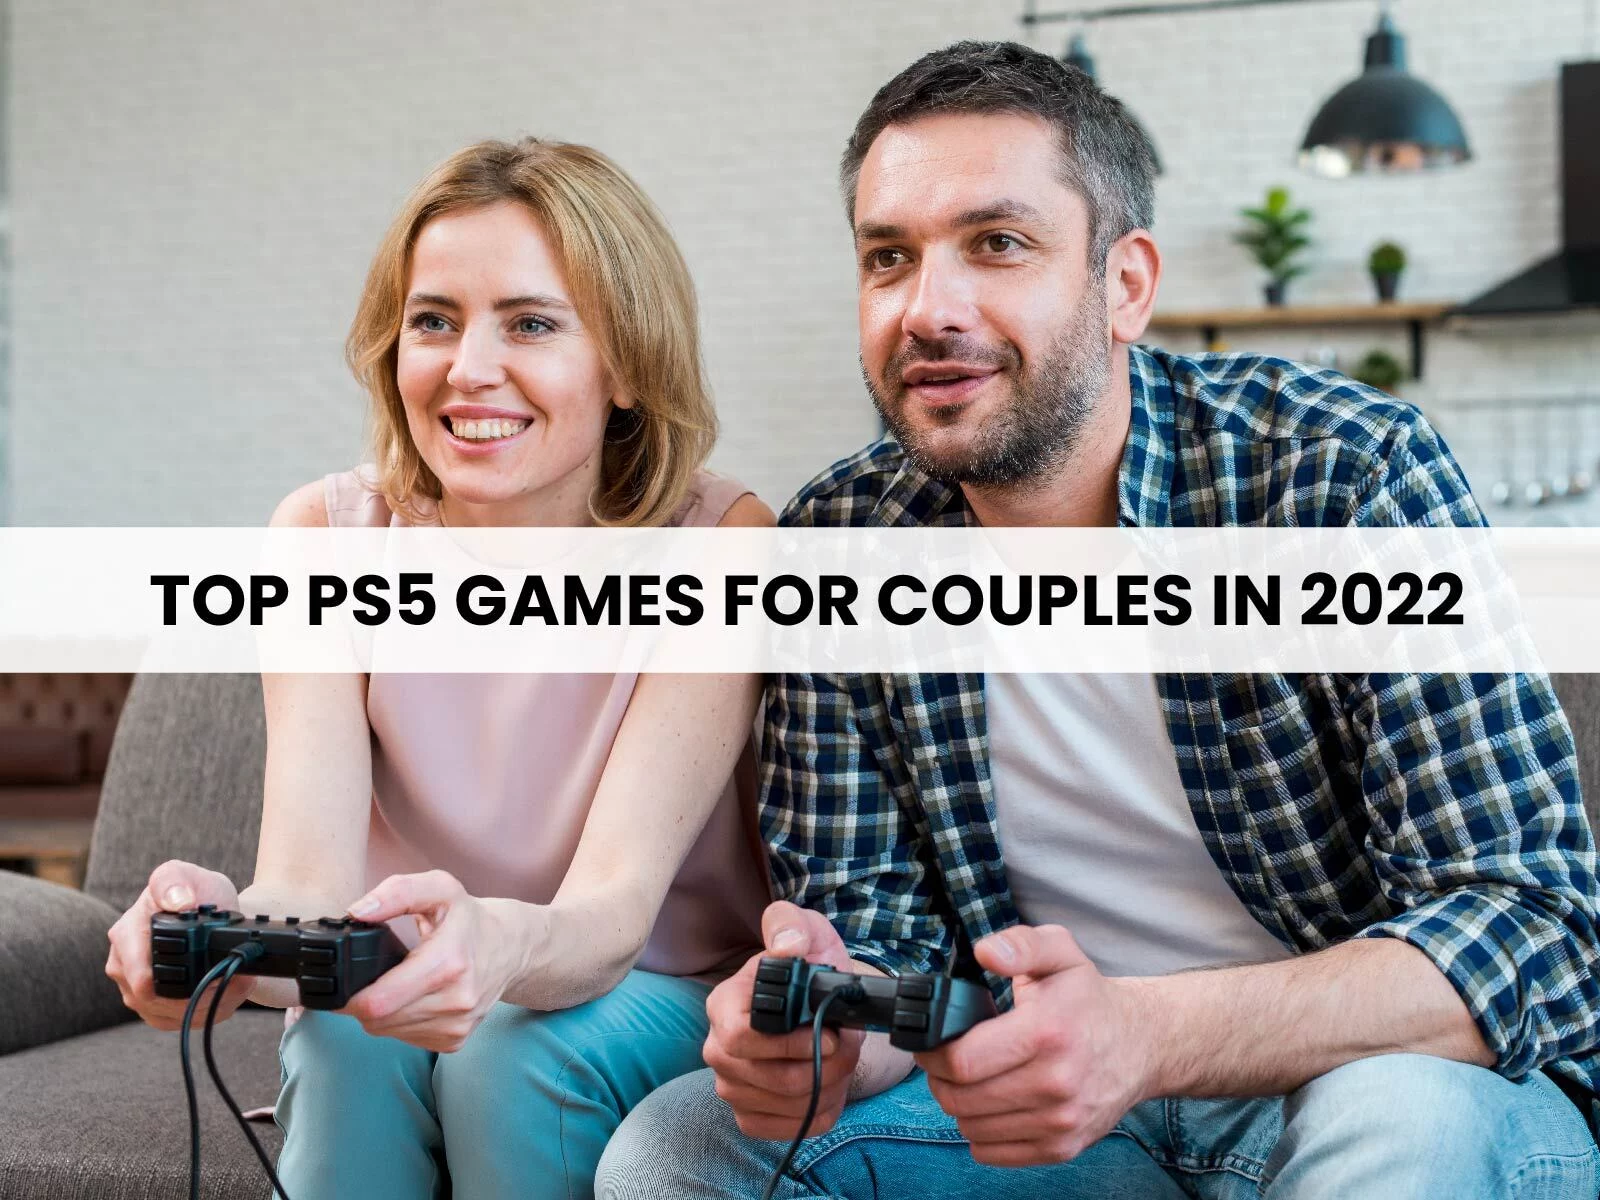 Top PS5 games for couples in 2022